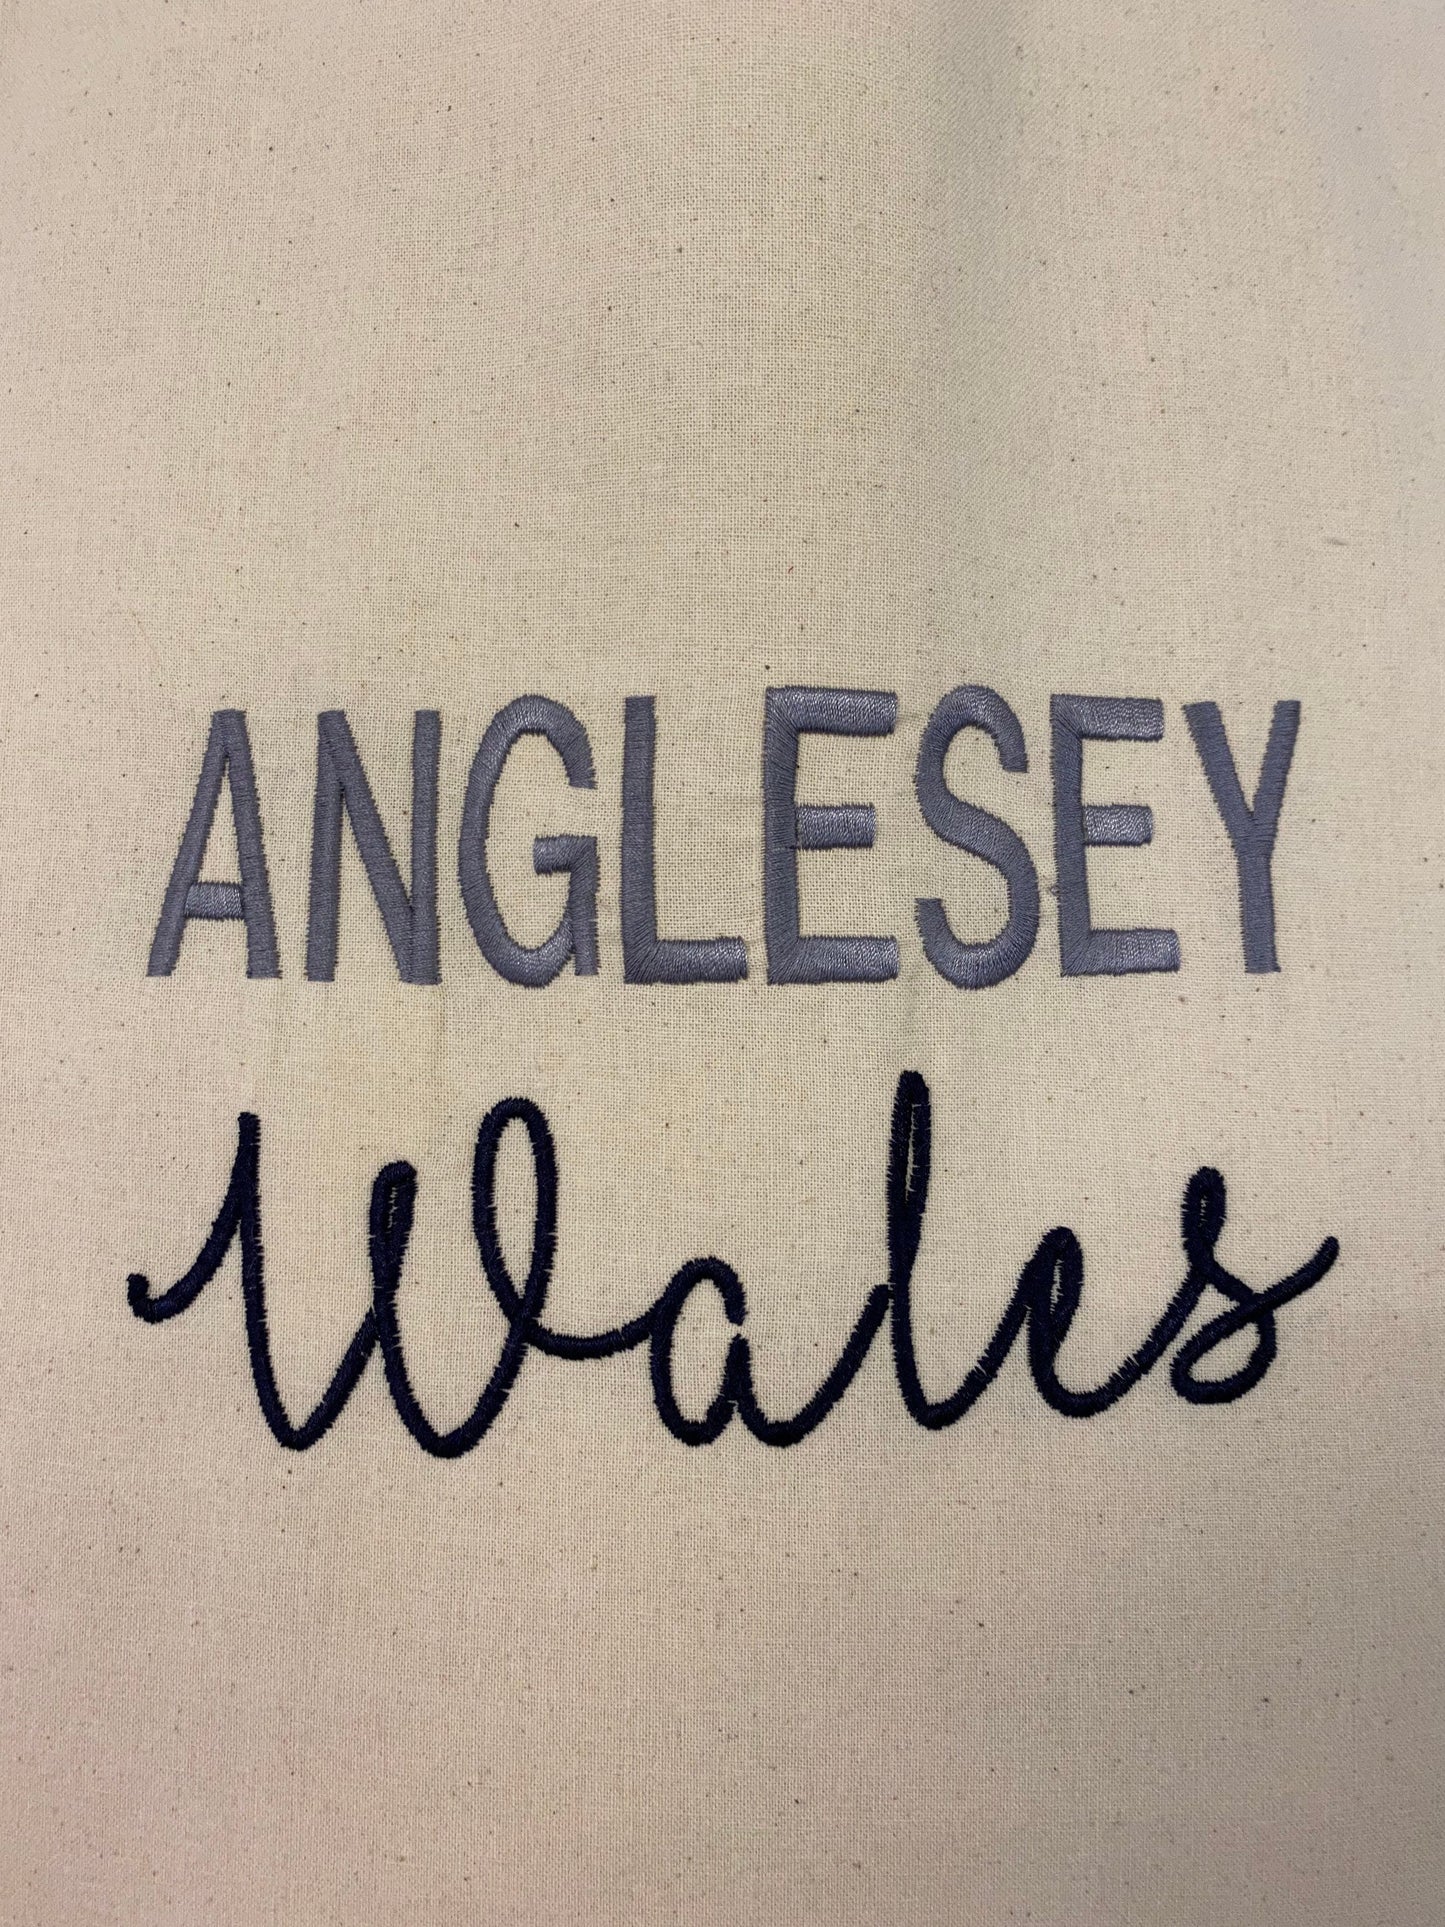 Lovely lightweight tote bag with embroidered text Anglesey Wales